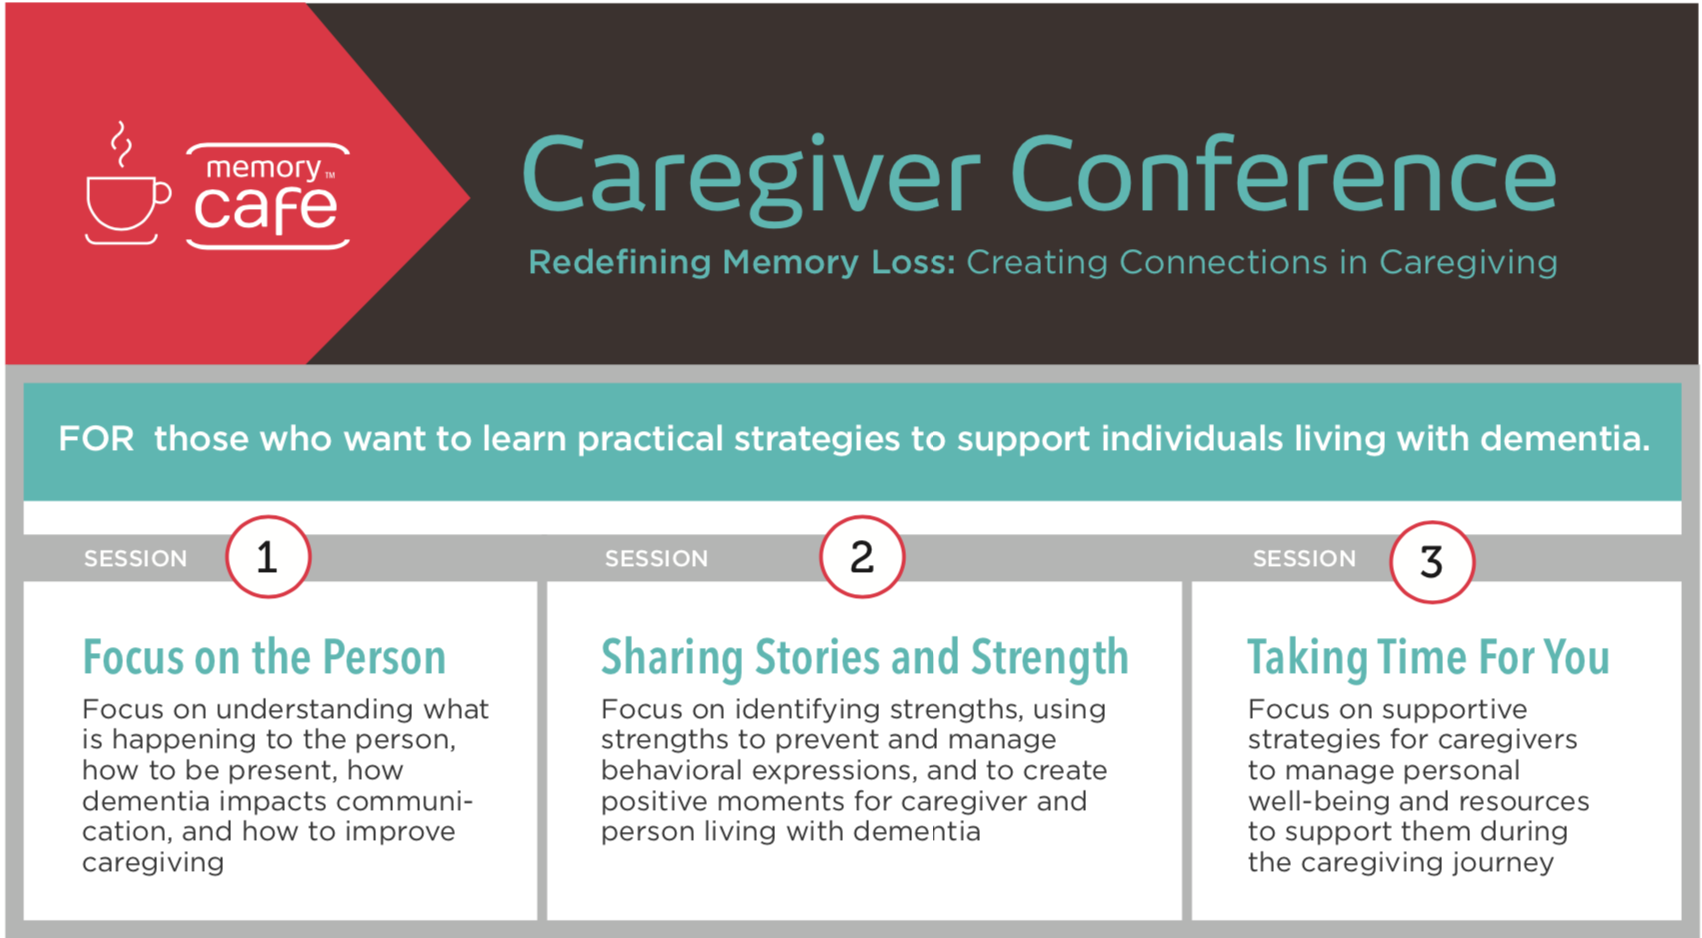 Redefining Memory Loss: Creating Connections in Caregiving